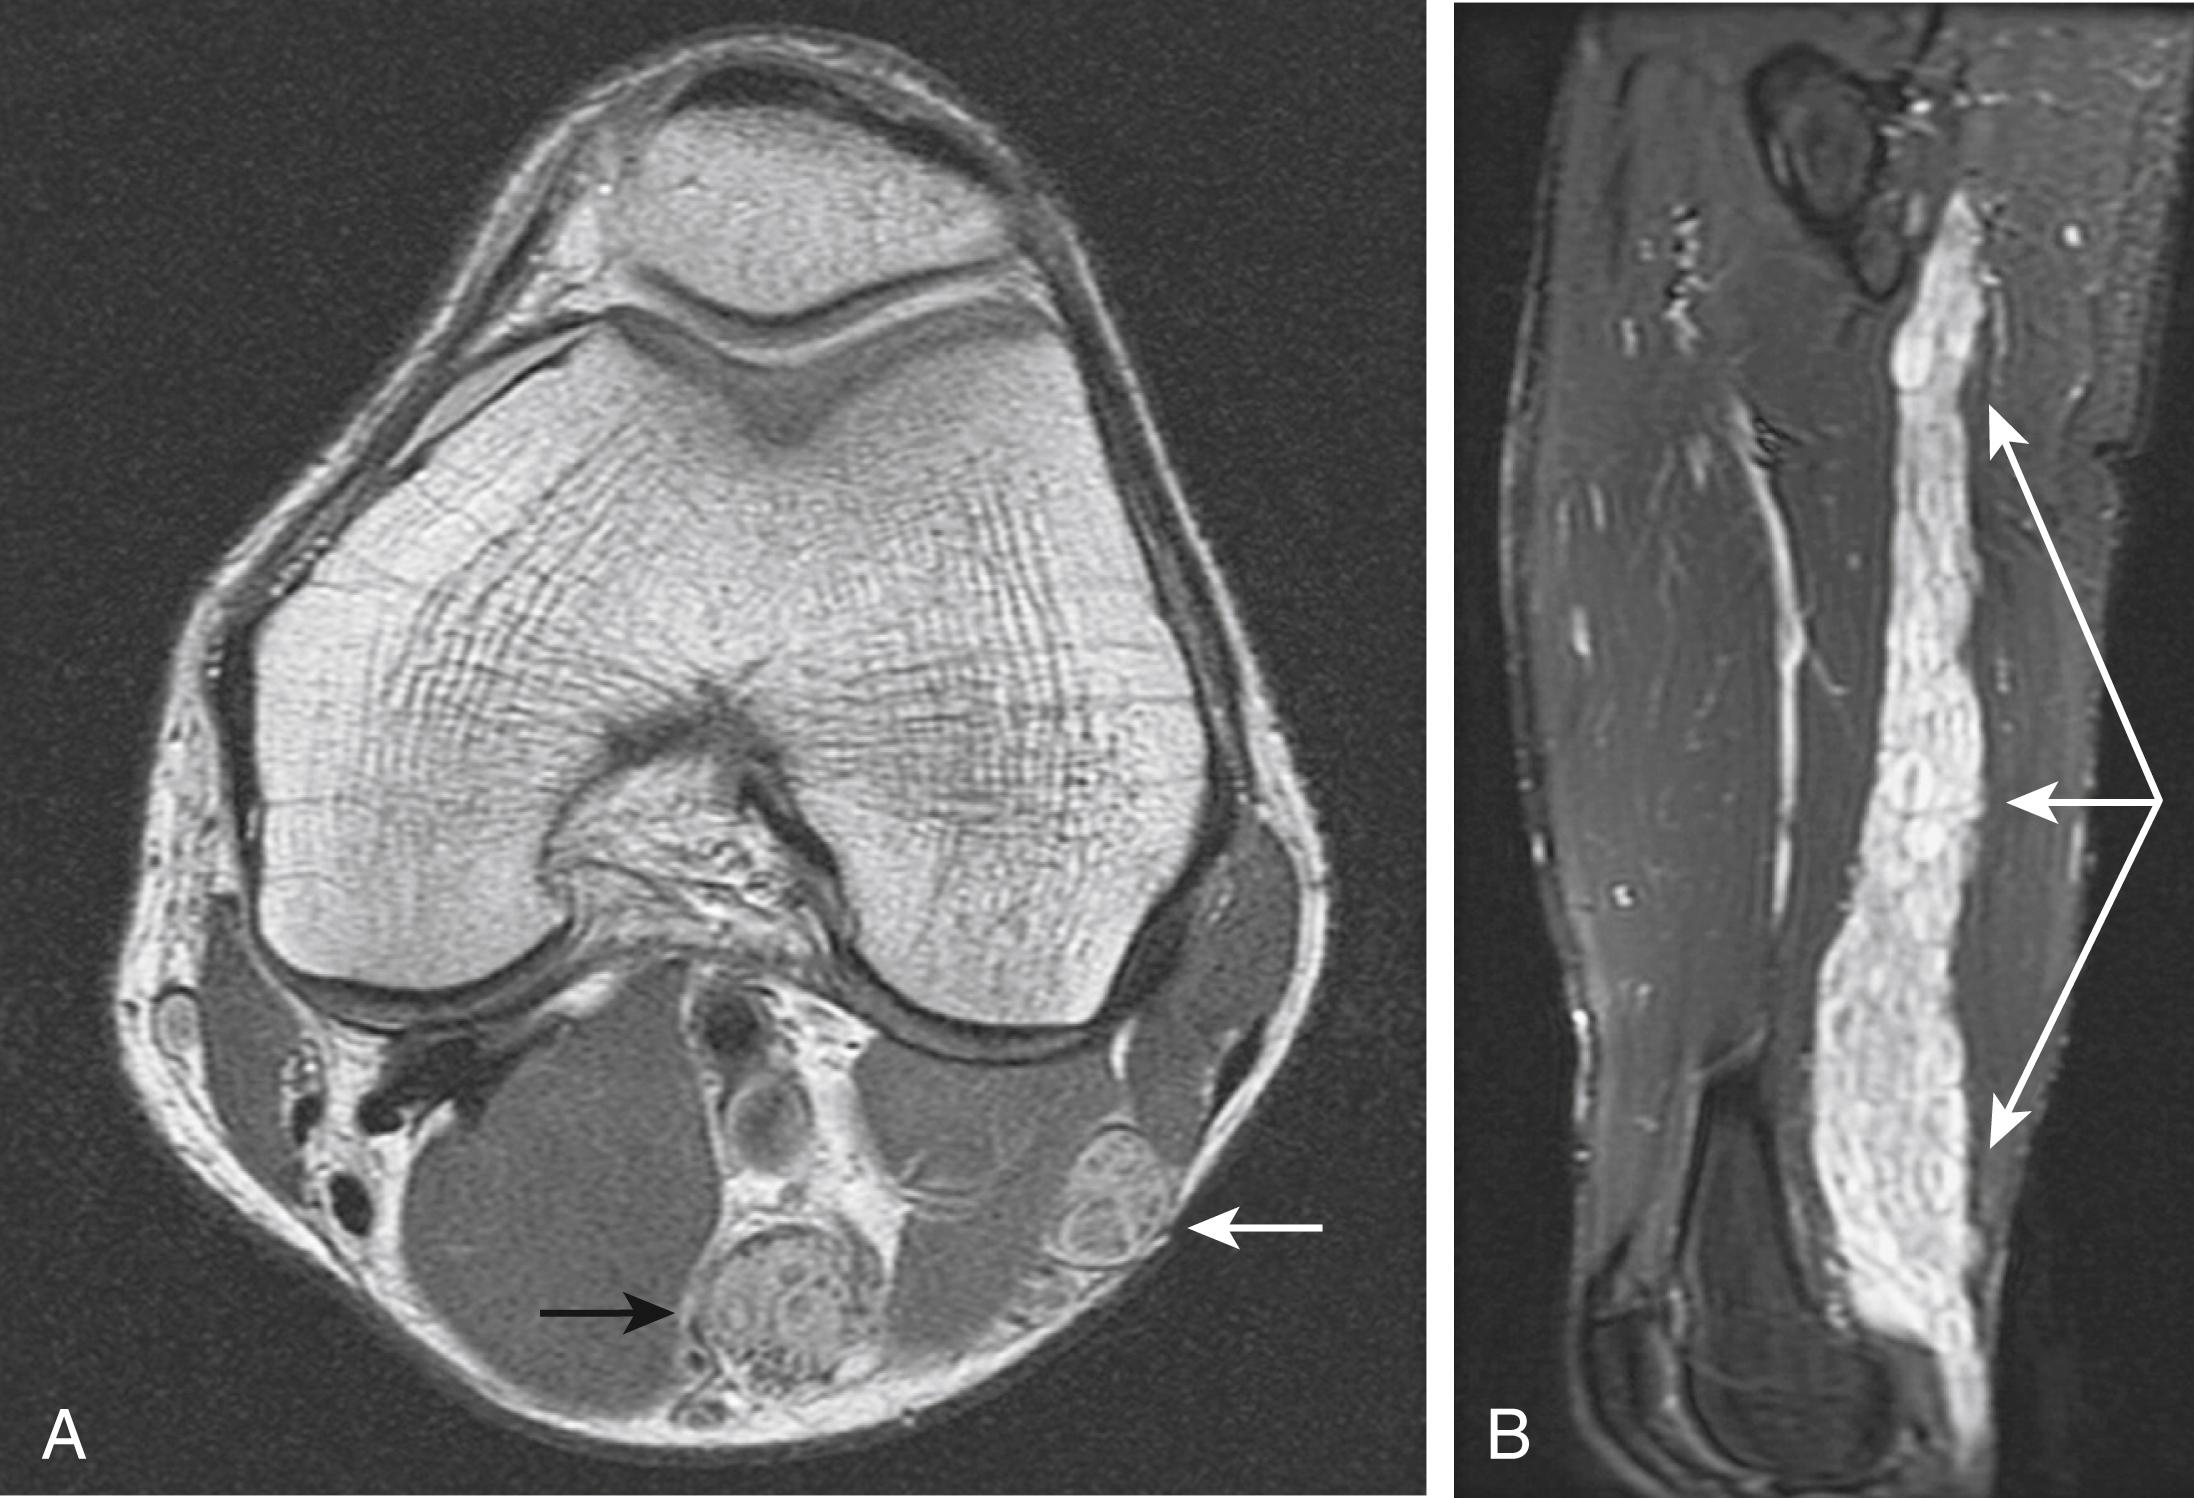 FIG. 172.1, A, Axial proton density-weighted image demonstrates markedly enlarged fascicles of both the tibial (black arrow) and common peroneal (white arrow) nerves because of plexiform neurofibromas. B, Large field-of-view sagittal fat-suppressed T2-weighted image in the same patient reveals extensive plexiform neurofibromas throughout the length of the sciatic nerve (arrows) .